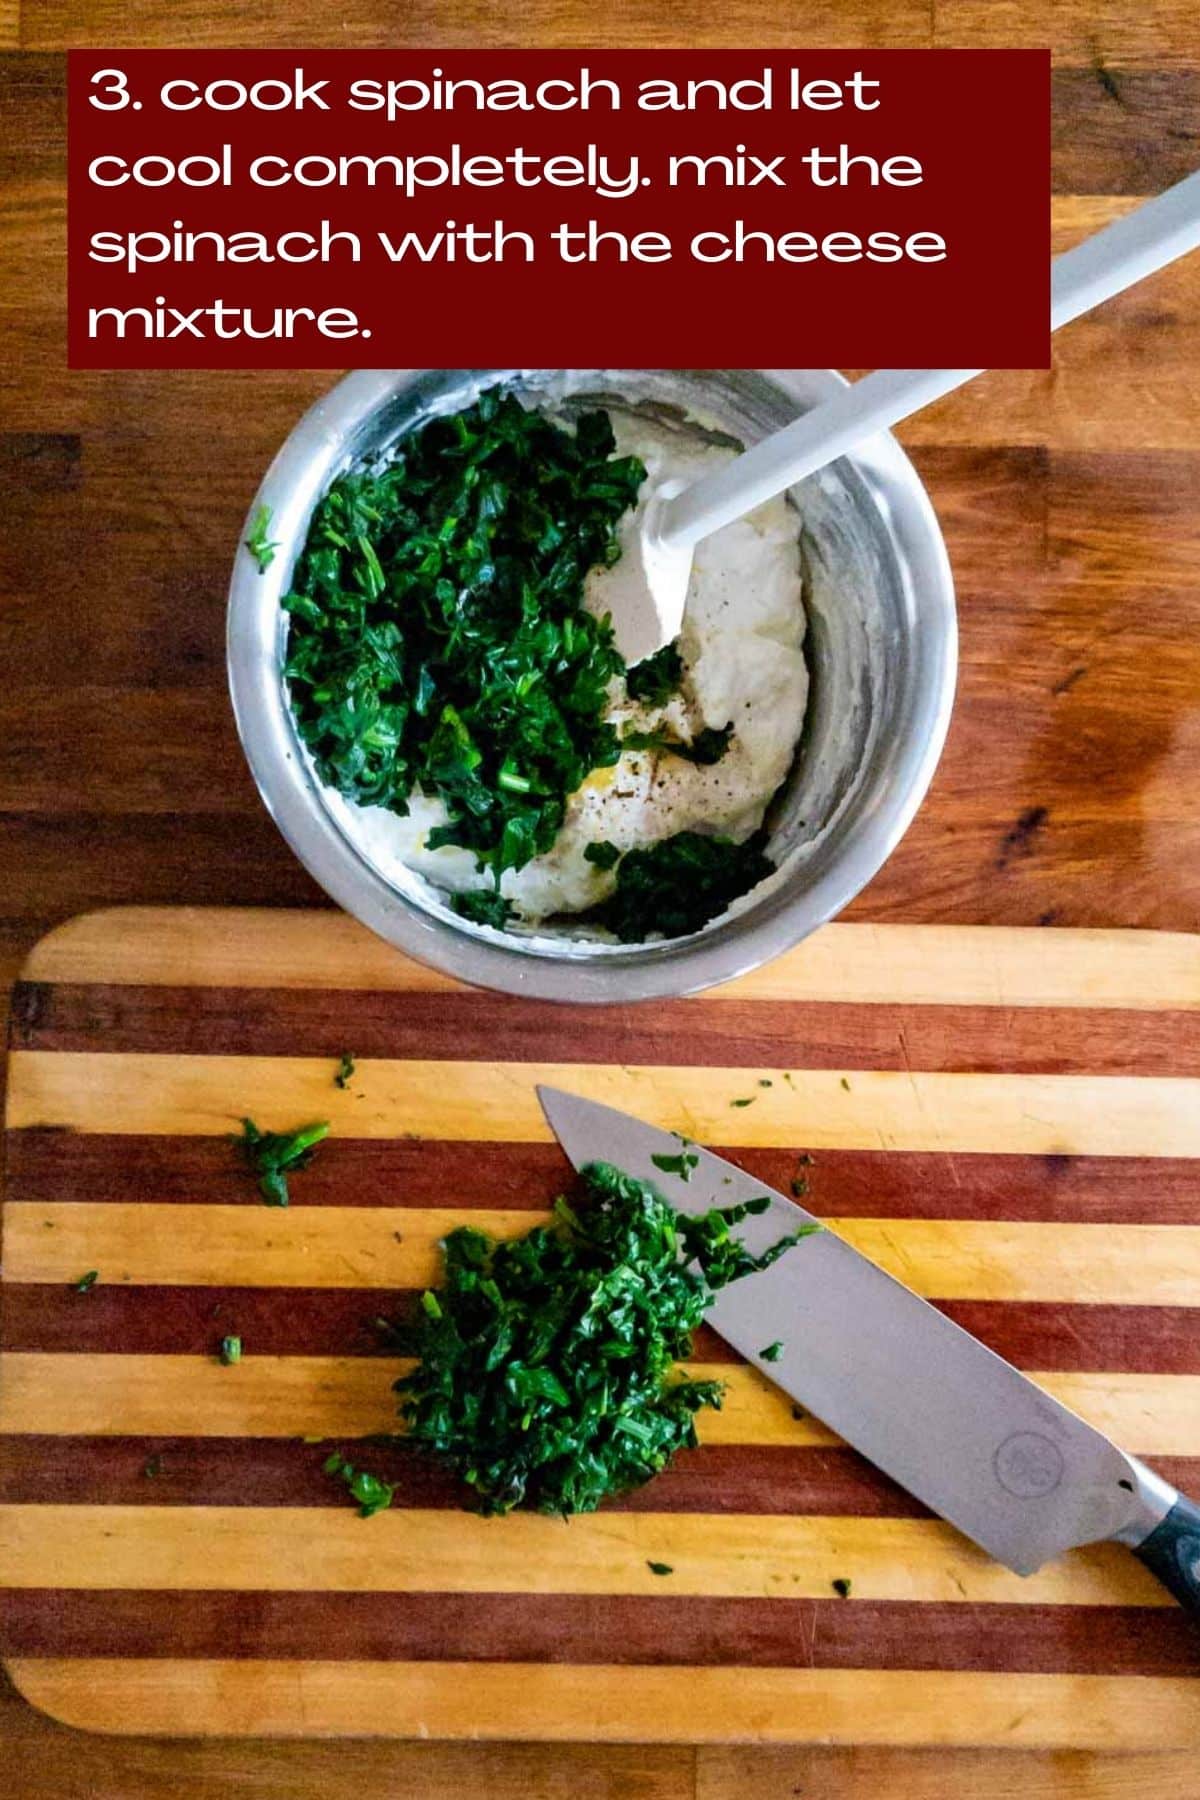 mixing spinach with ricotta cheese mixture.